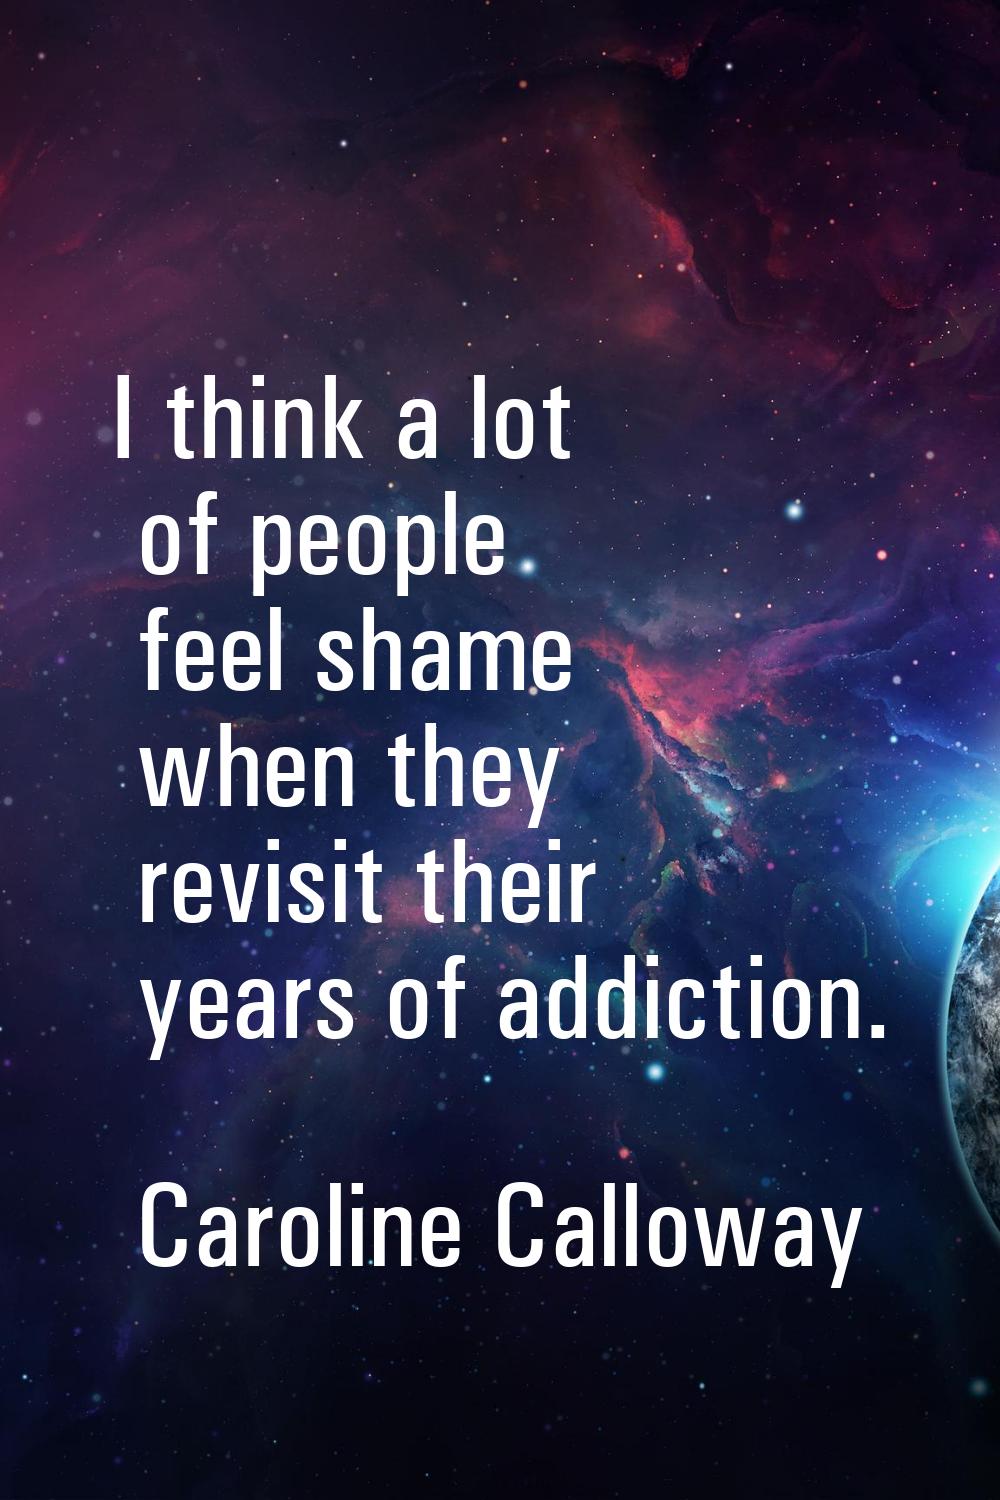 I think a lot of people feel shame when they revisit their years of addiction.